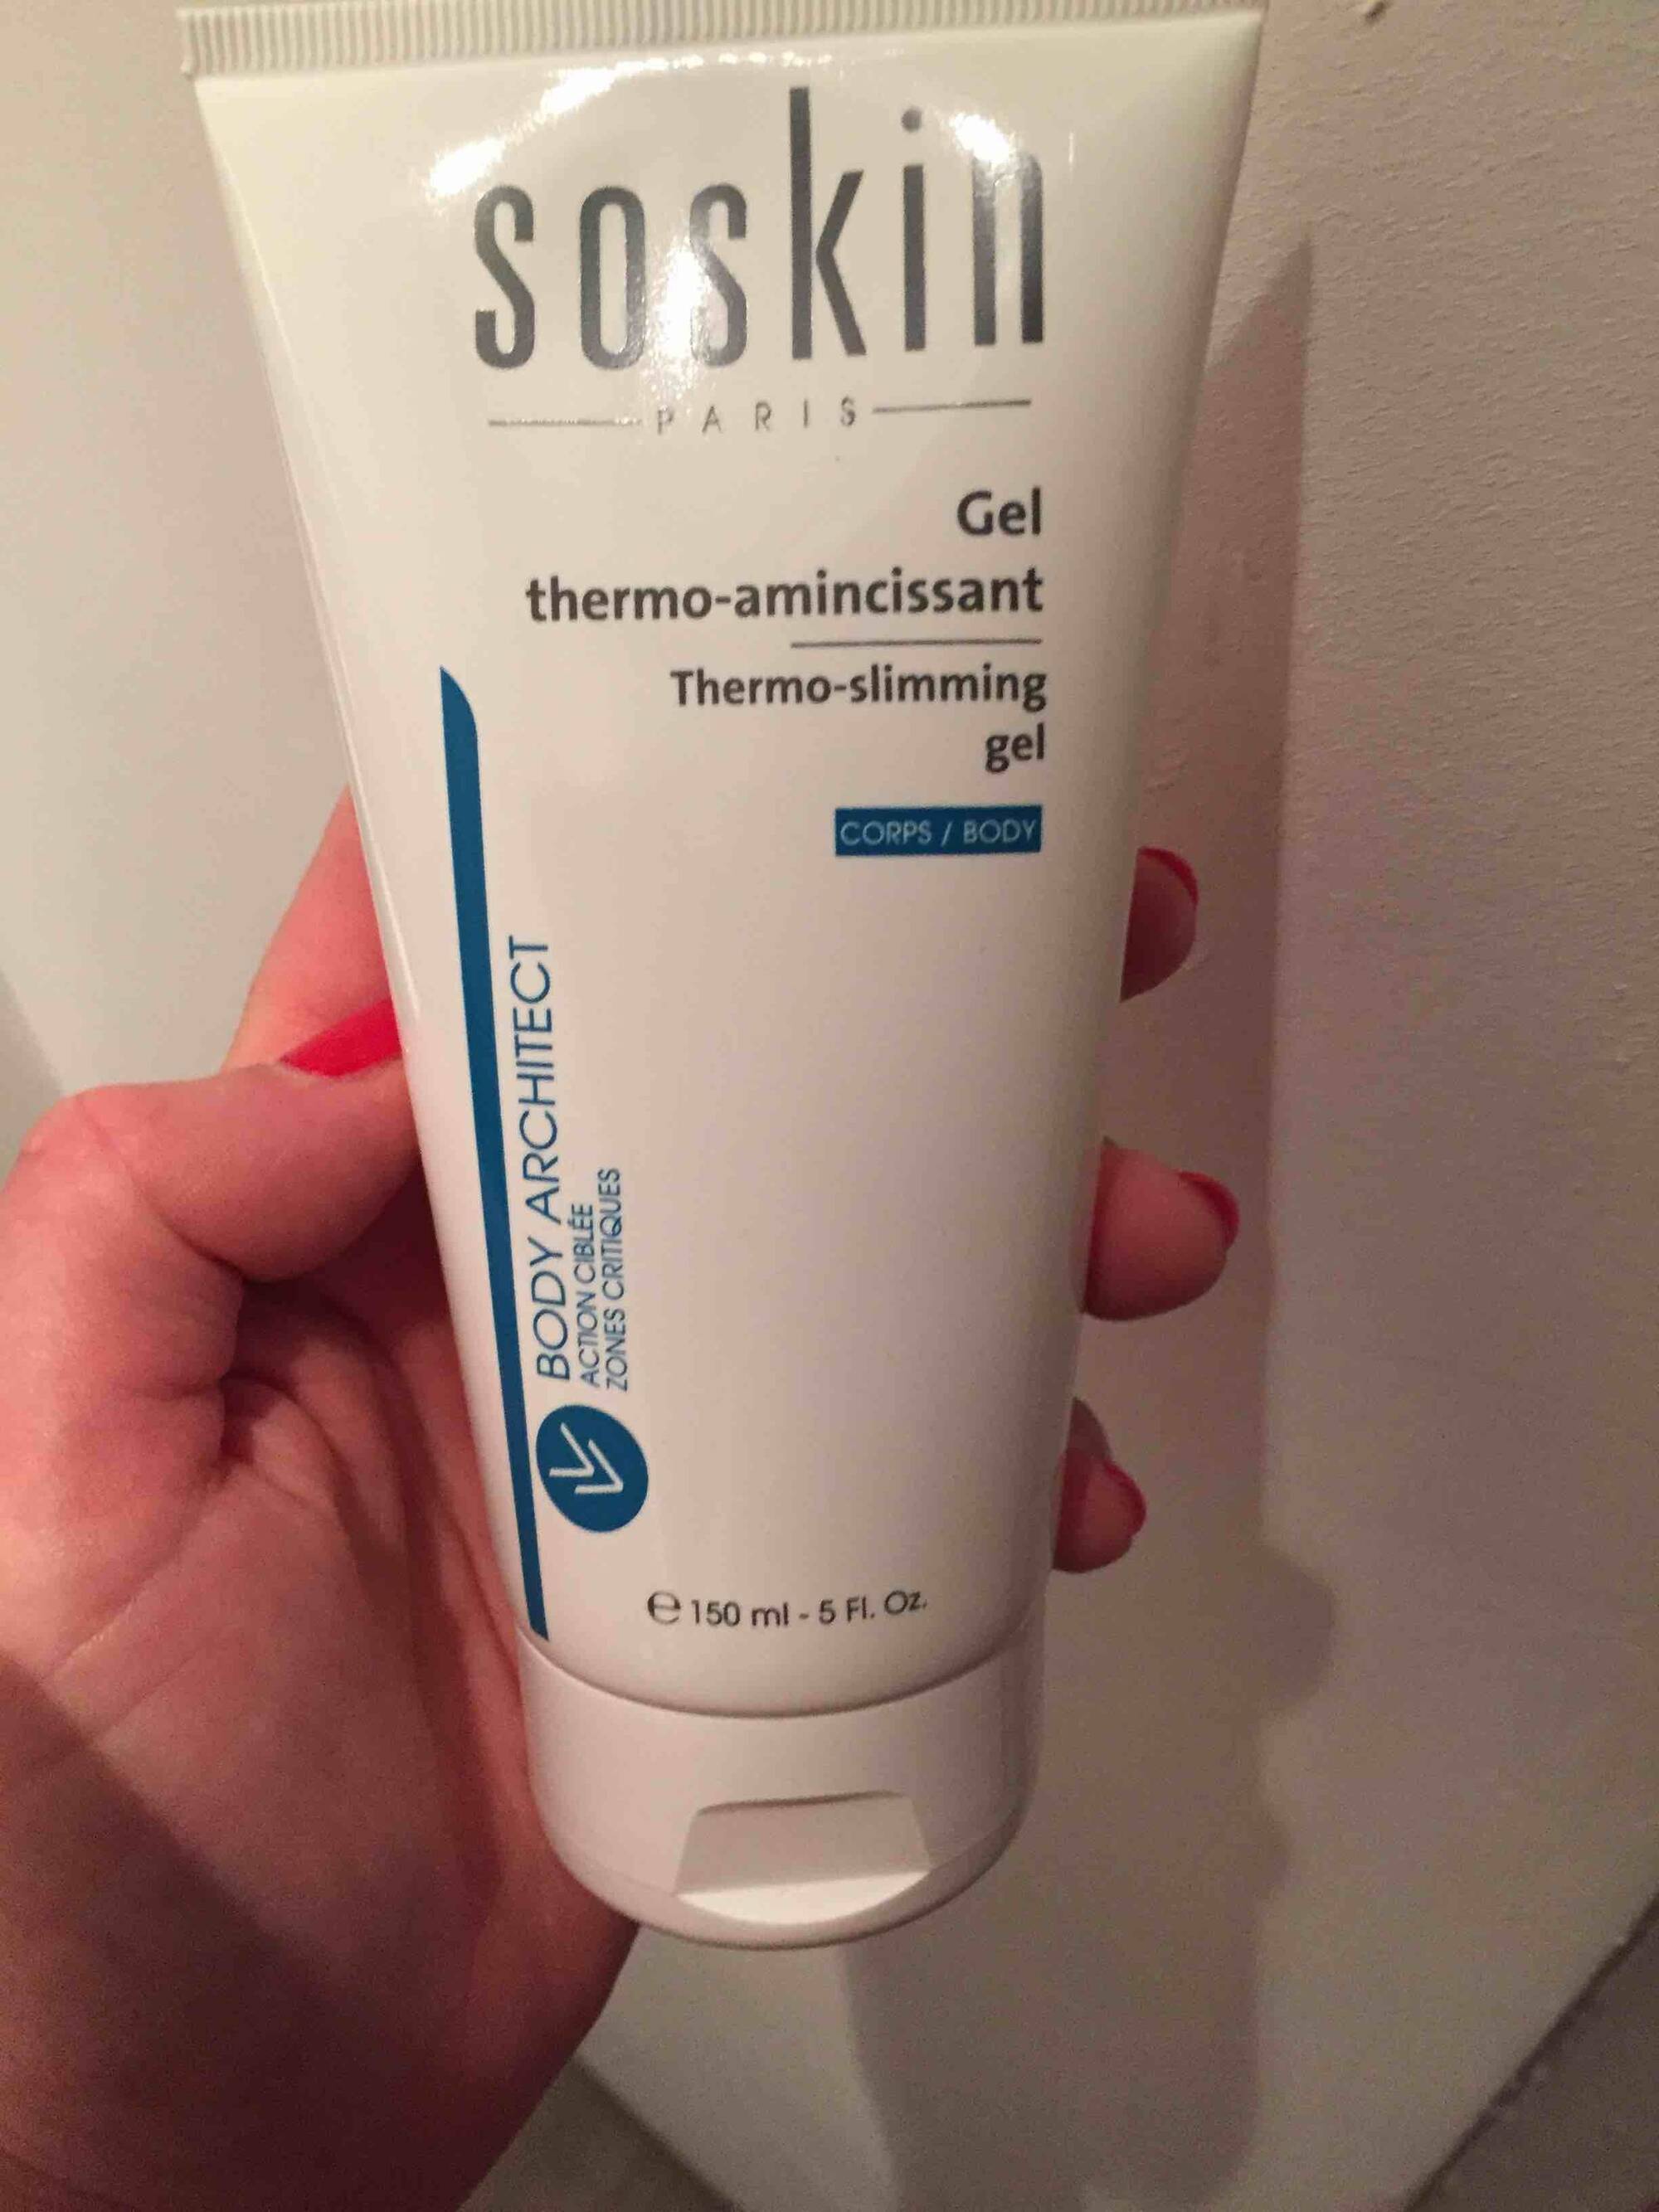 SOSKIN - Gel thermo amincissant